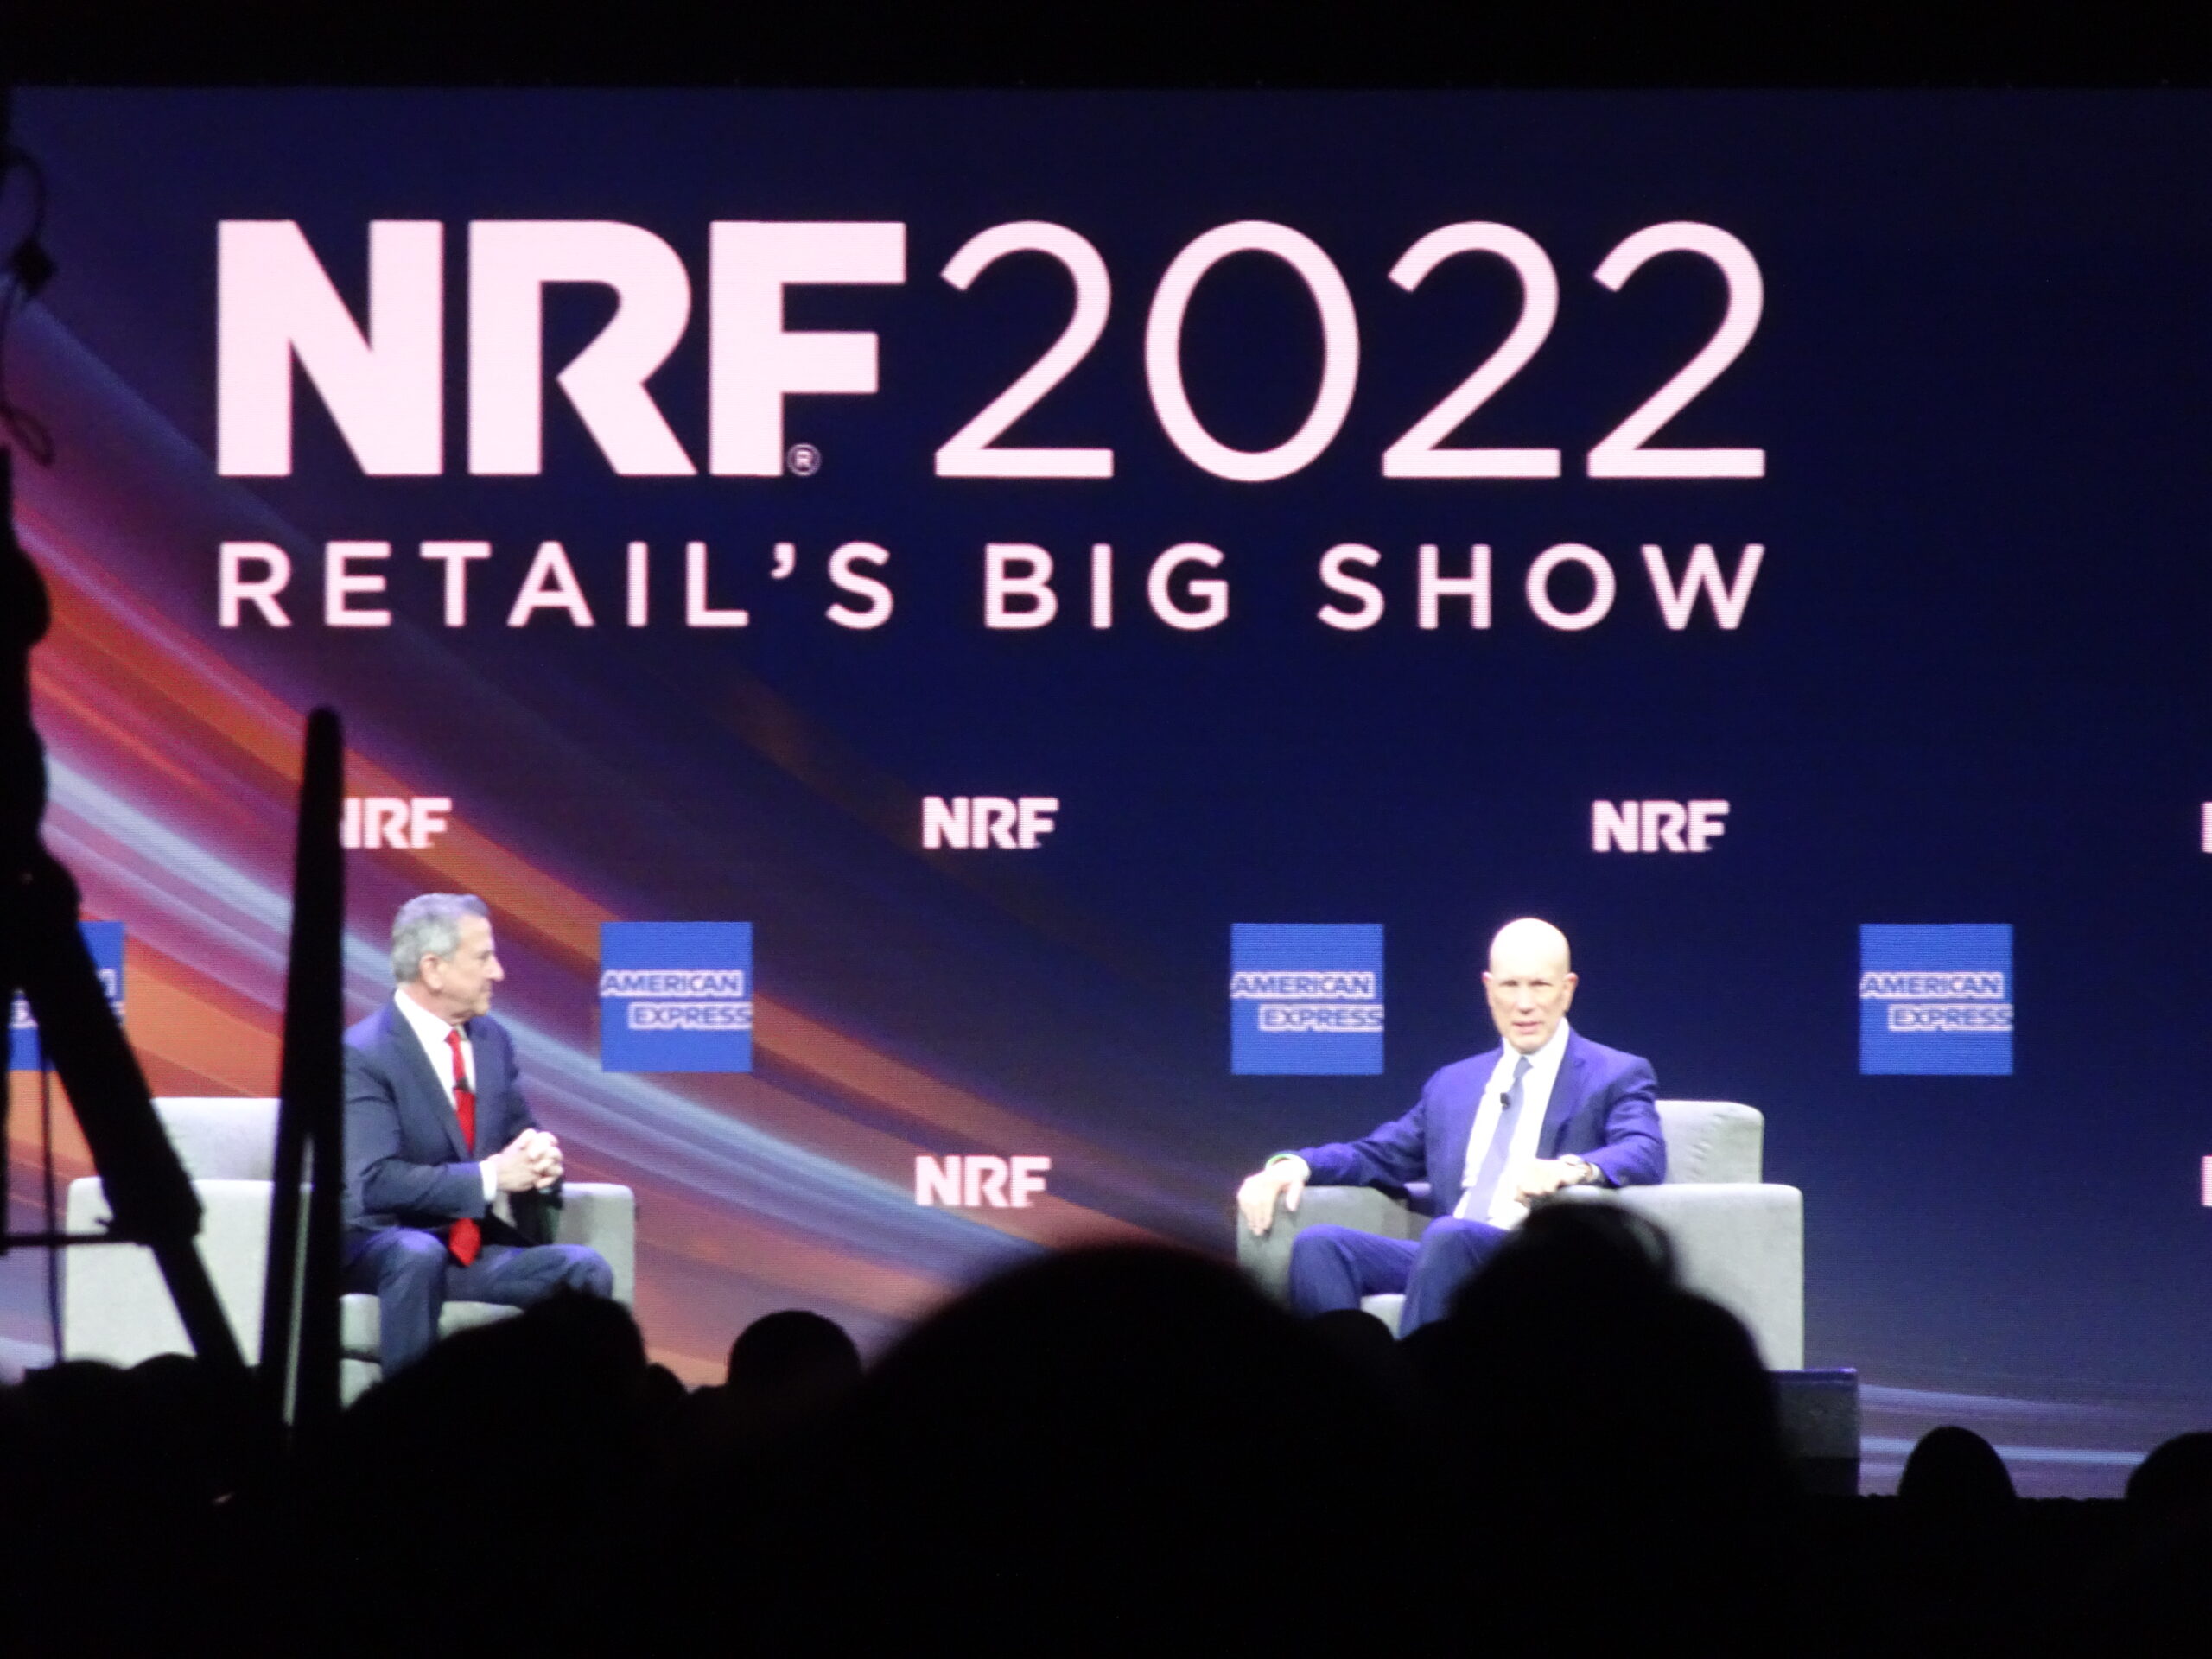 Brian Cornell (Target CEO) and Matthew Shay (President and CEO National Retail Federation) in a discussion about retail trends